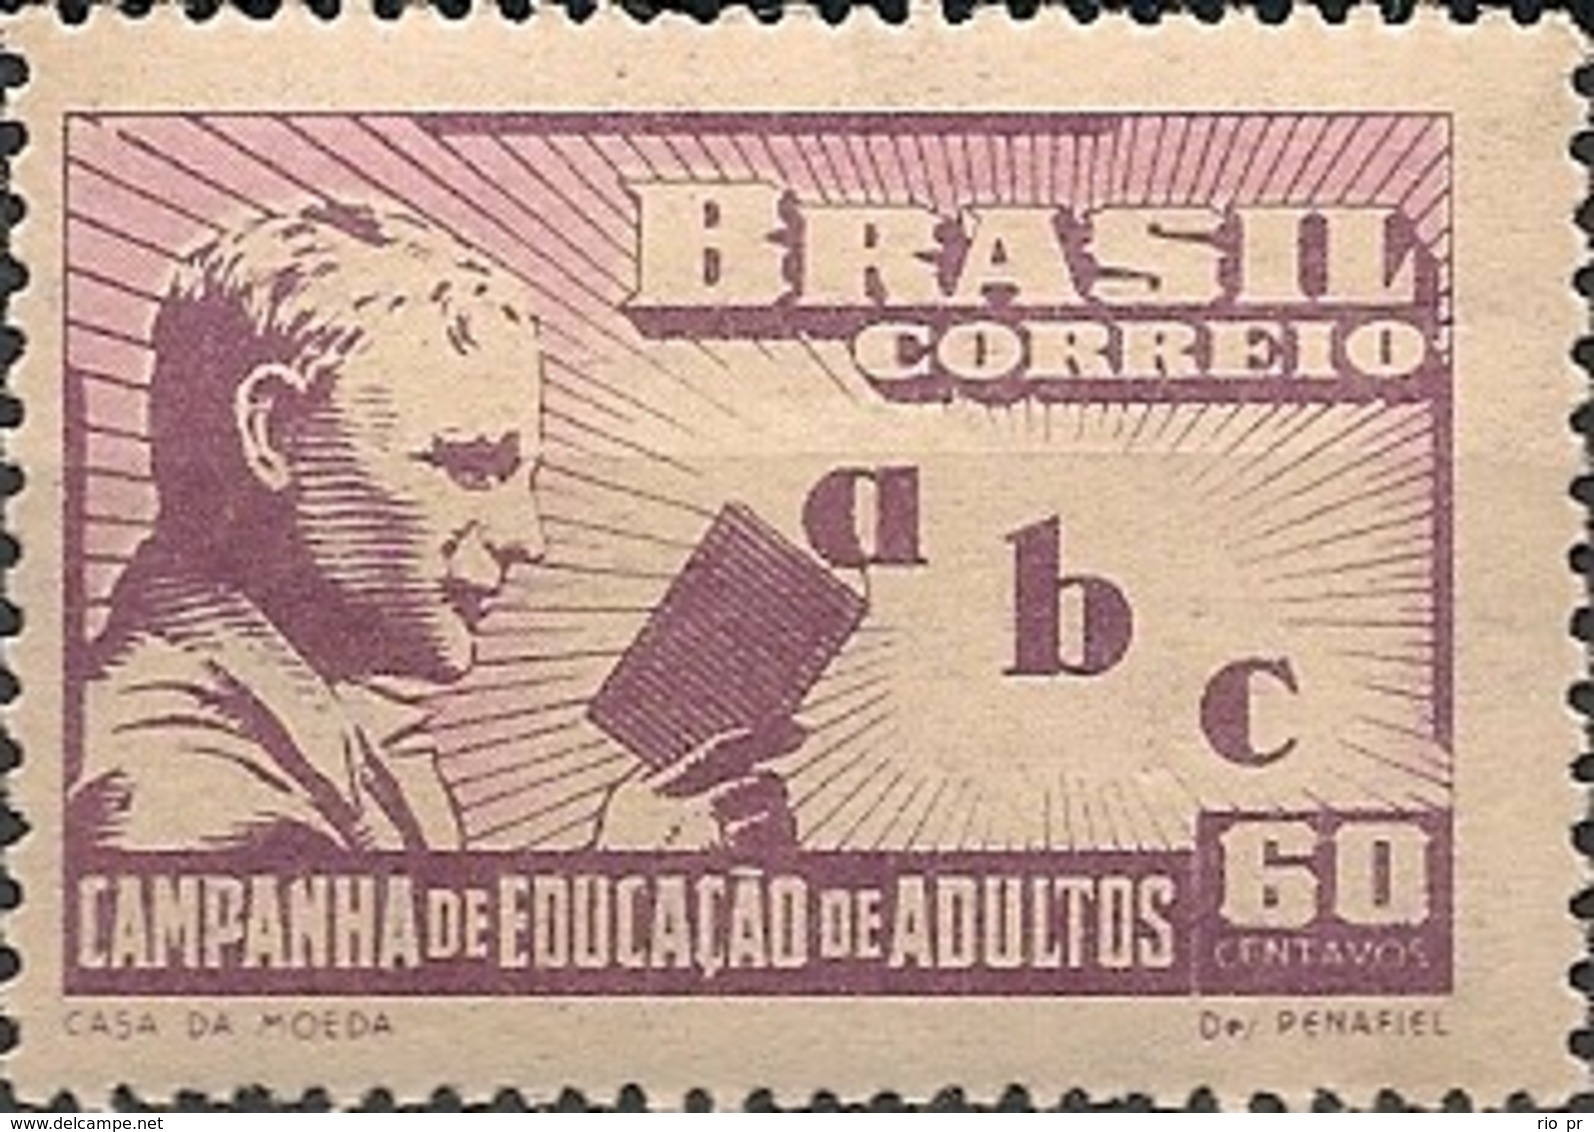 BRAZIL - CAMPAIGN FOR ADULT EDUCATION 1949 - MNH - Ungebraucht